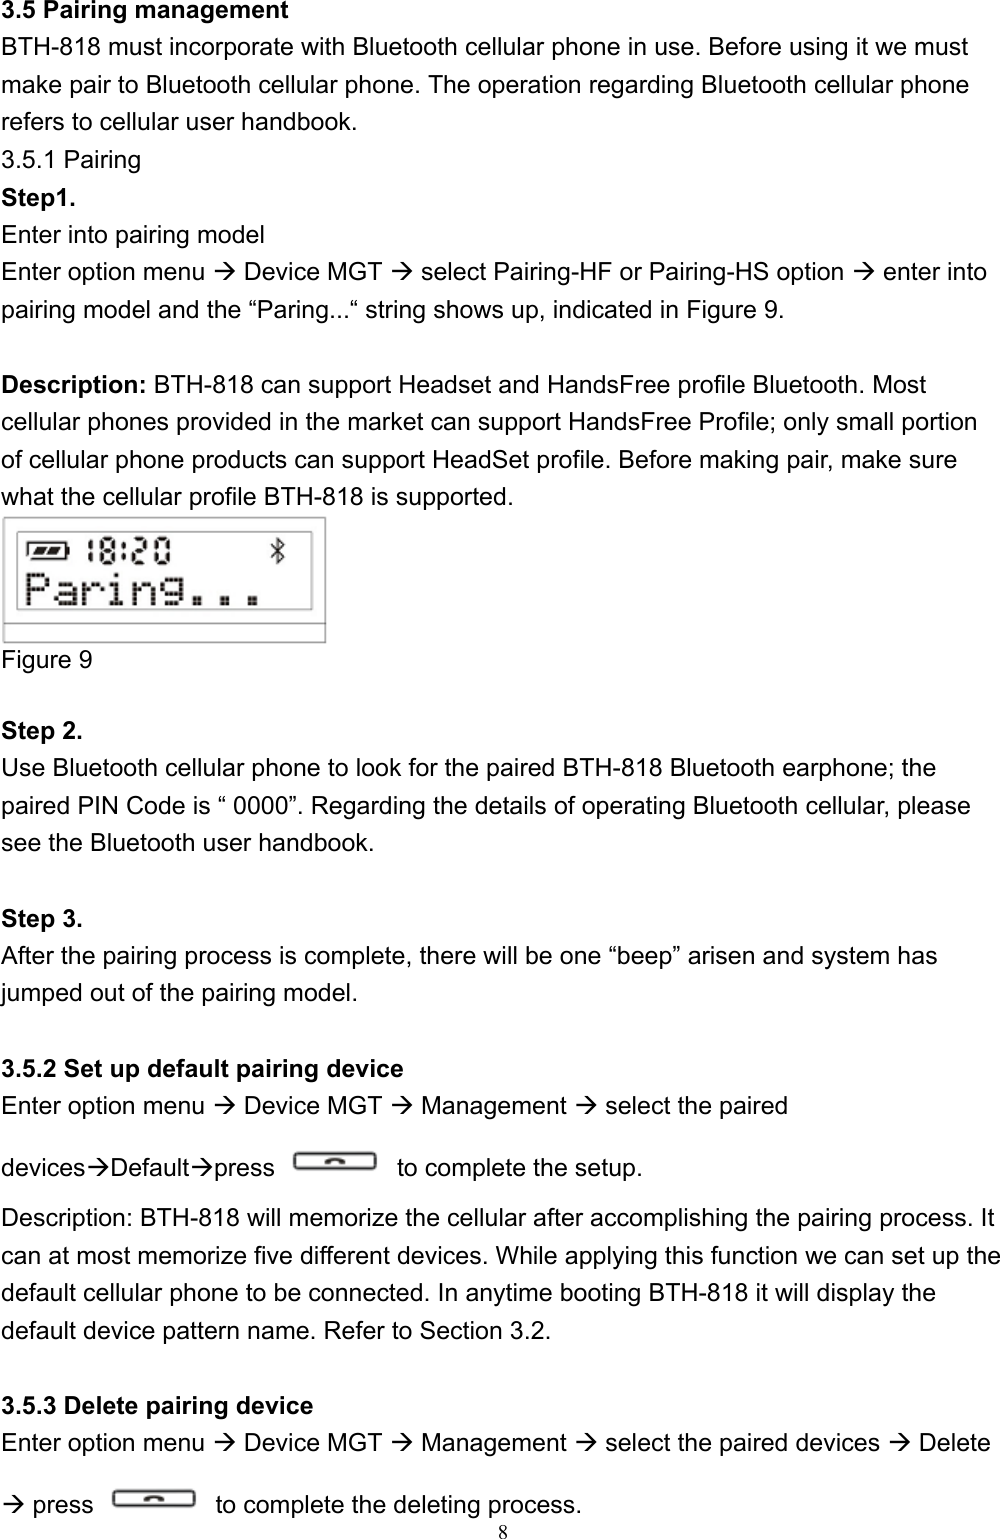  8  3.5 Pairing management BTH-818 must incorporate with Bluetooth cellular phone in use. Before using it we must make pair to Bluetooth cellular phone. The operation regarding Bluetooth cellular phone refers to cellular user handbook.   3.5.1 Pairing Step1.  Enter into pairing model Enter option menu  Device MGT  select Pairing-HF or Pairing-HS option  enter into pairing model and the “Paring...“ string shows up, indicated in Figure 9.  Description: BTH-818 can support Headset and HandsFree profile Bluetooth. Most cellular phones provided in the market can support HandsFree Profile; only small portion of cellular phone products can support HeadSet profile. Before making pair, make sure what the cellular profile BTH-818 is supported.    Figure 9  Step 2.   Use Bluetooth cellular phone to look for the paired BTH-818 Bluetooth earphone; the paired PIN Code is “ 0000”. Regarding the details of operating Bluetooth cellular, please see the Bluetooth user handbook.    Step 3. After the pairing process is complete, there will be one “beep” arisen and system has jumped out of the pairing model.  3.5.2 Set up default pairing device Enter option menu  Device MGT  Management  select the paired devicesDefaultpress    to complete the setup. Description: BTH-818 will memorize the cellular after accomplishing the pairing process. It can at most memorize five different devices. While applying this function we can set up the default cellular phone to be connected. In anytime booting BTH-818 it will display the default device pattern name. Refer to Section 3.2.    3.5.3 Delete pairing device Enter option menu  Device MGT  Management  select the paired devices  Delete  press    to complete the deleting process. 